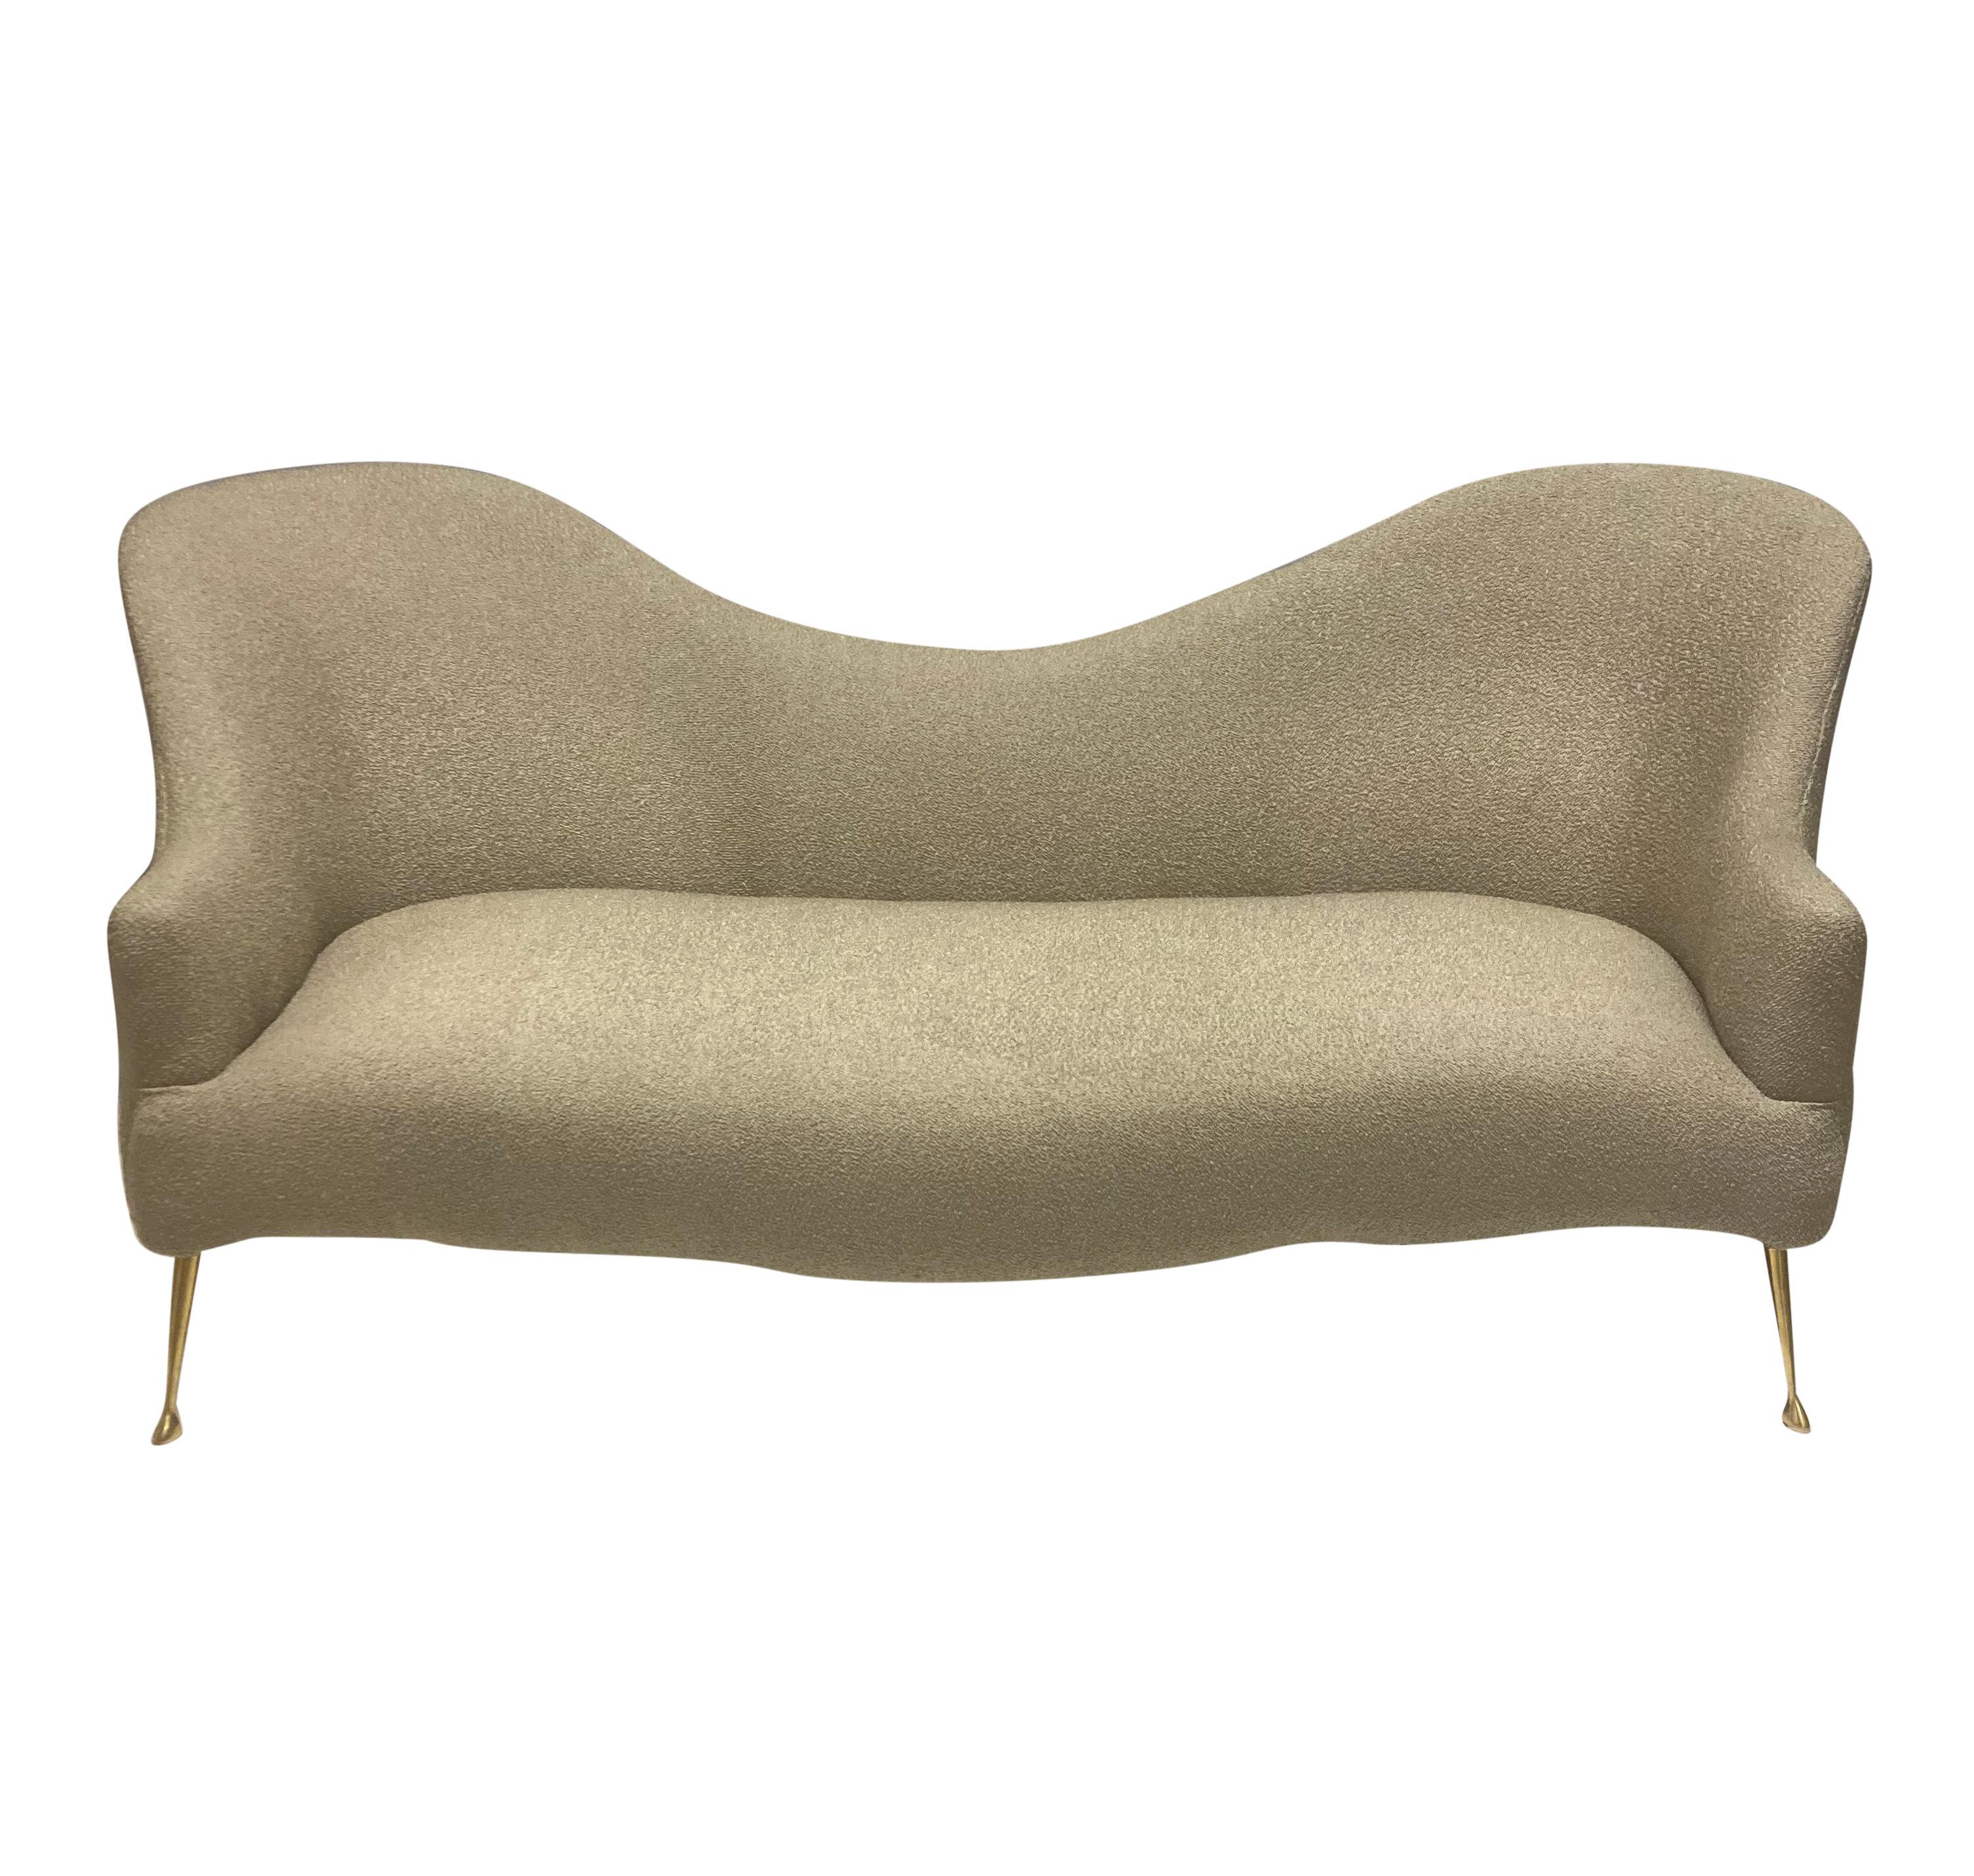 An Italian mid-century sofa of sculptural form, on brass legs and newly upholstered in a stone coloured wool boucle.